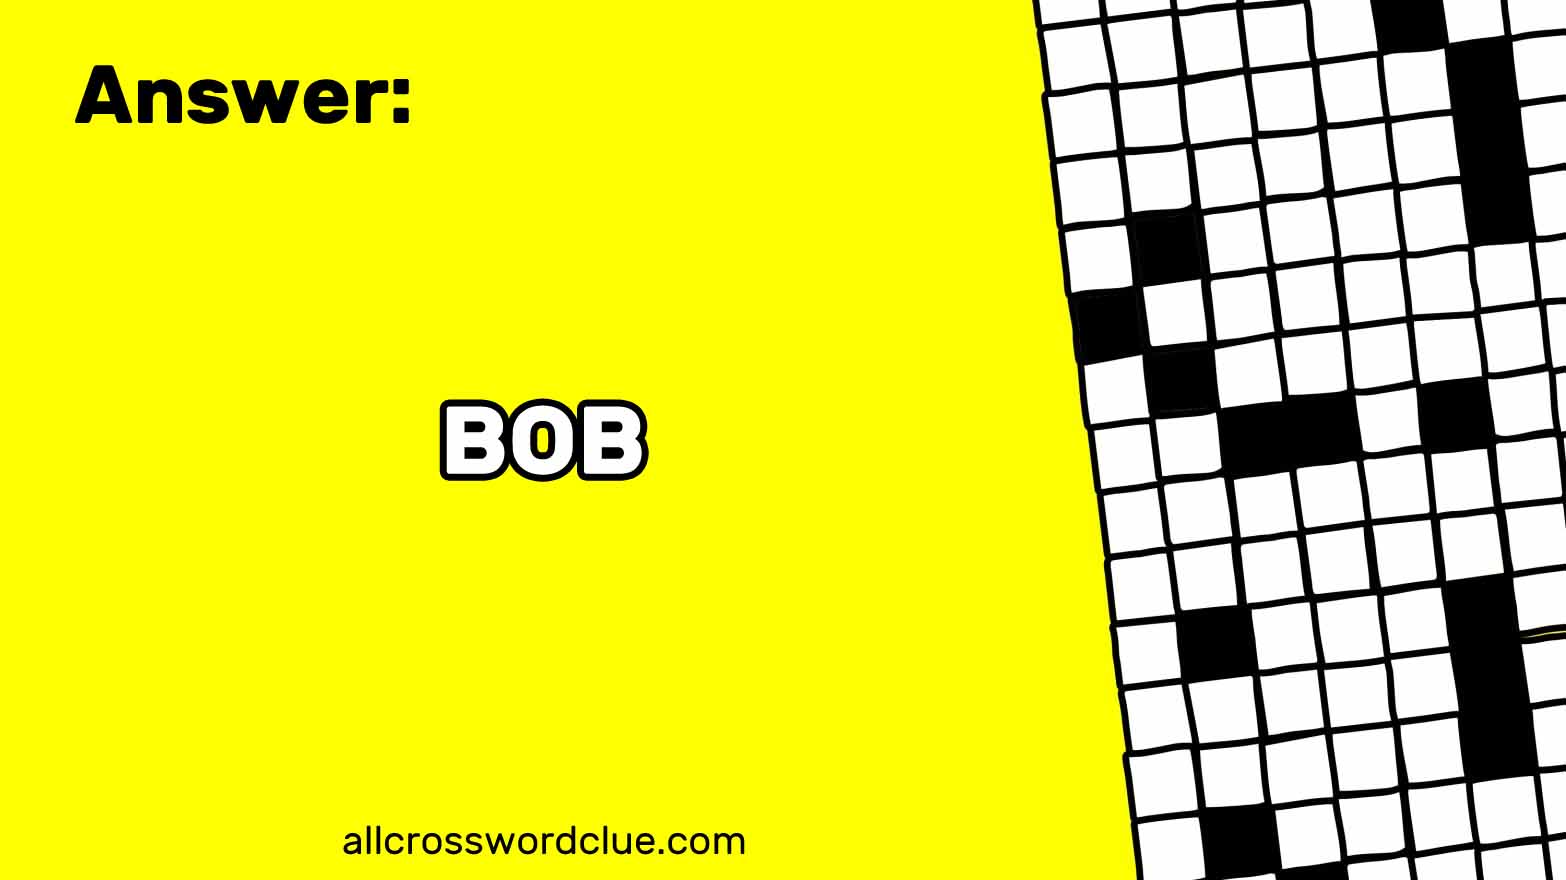 Lead in to sleigh Crossword Clue answer BOB